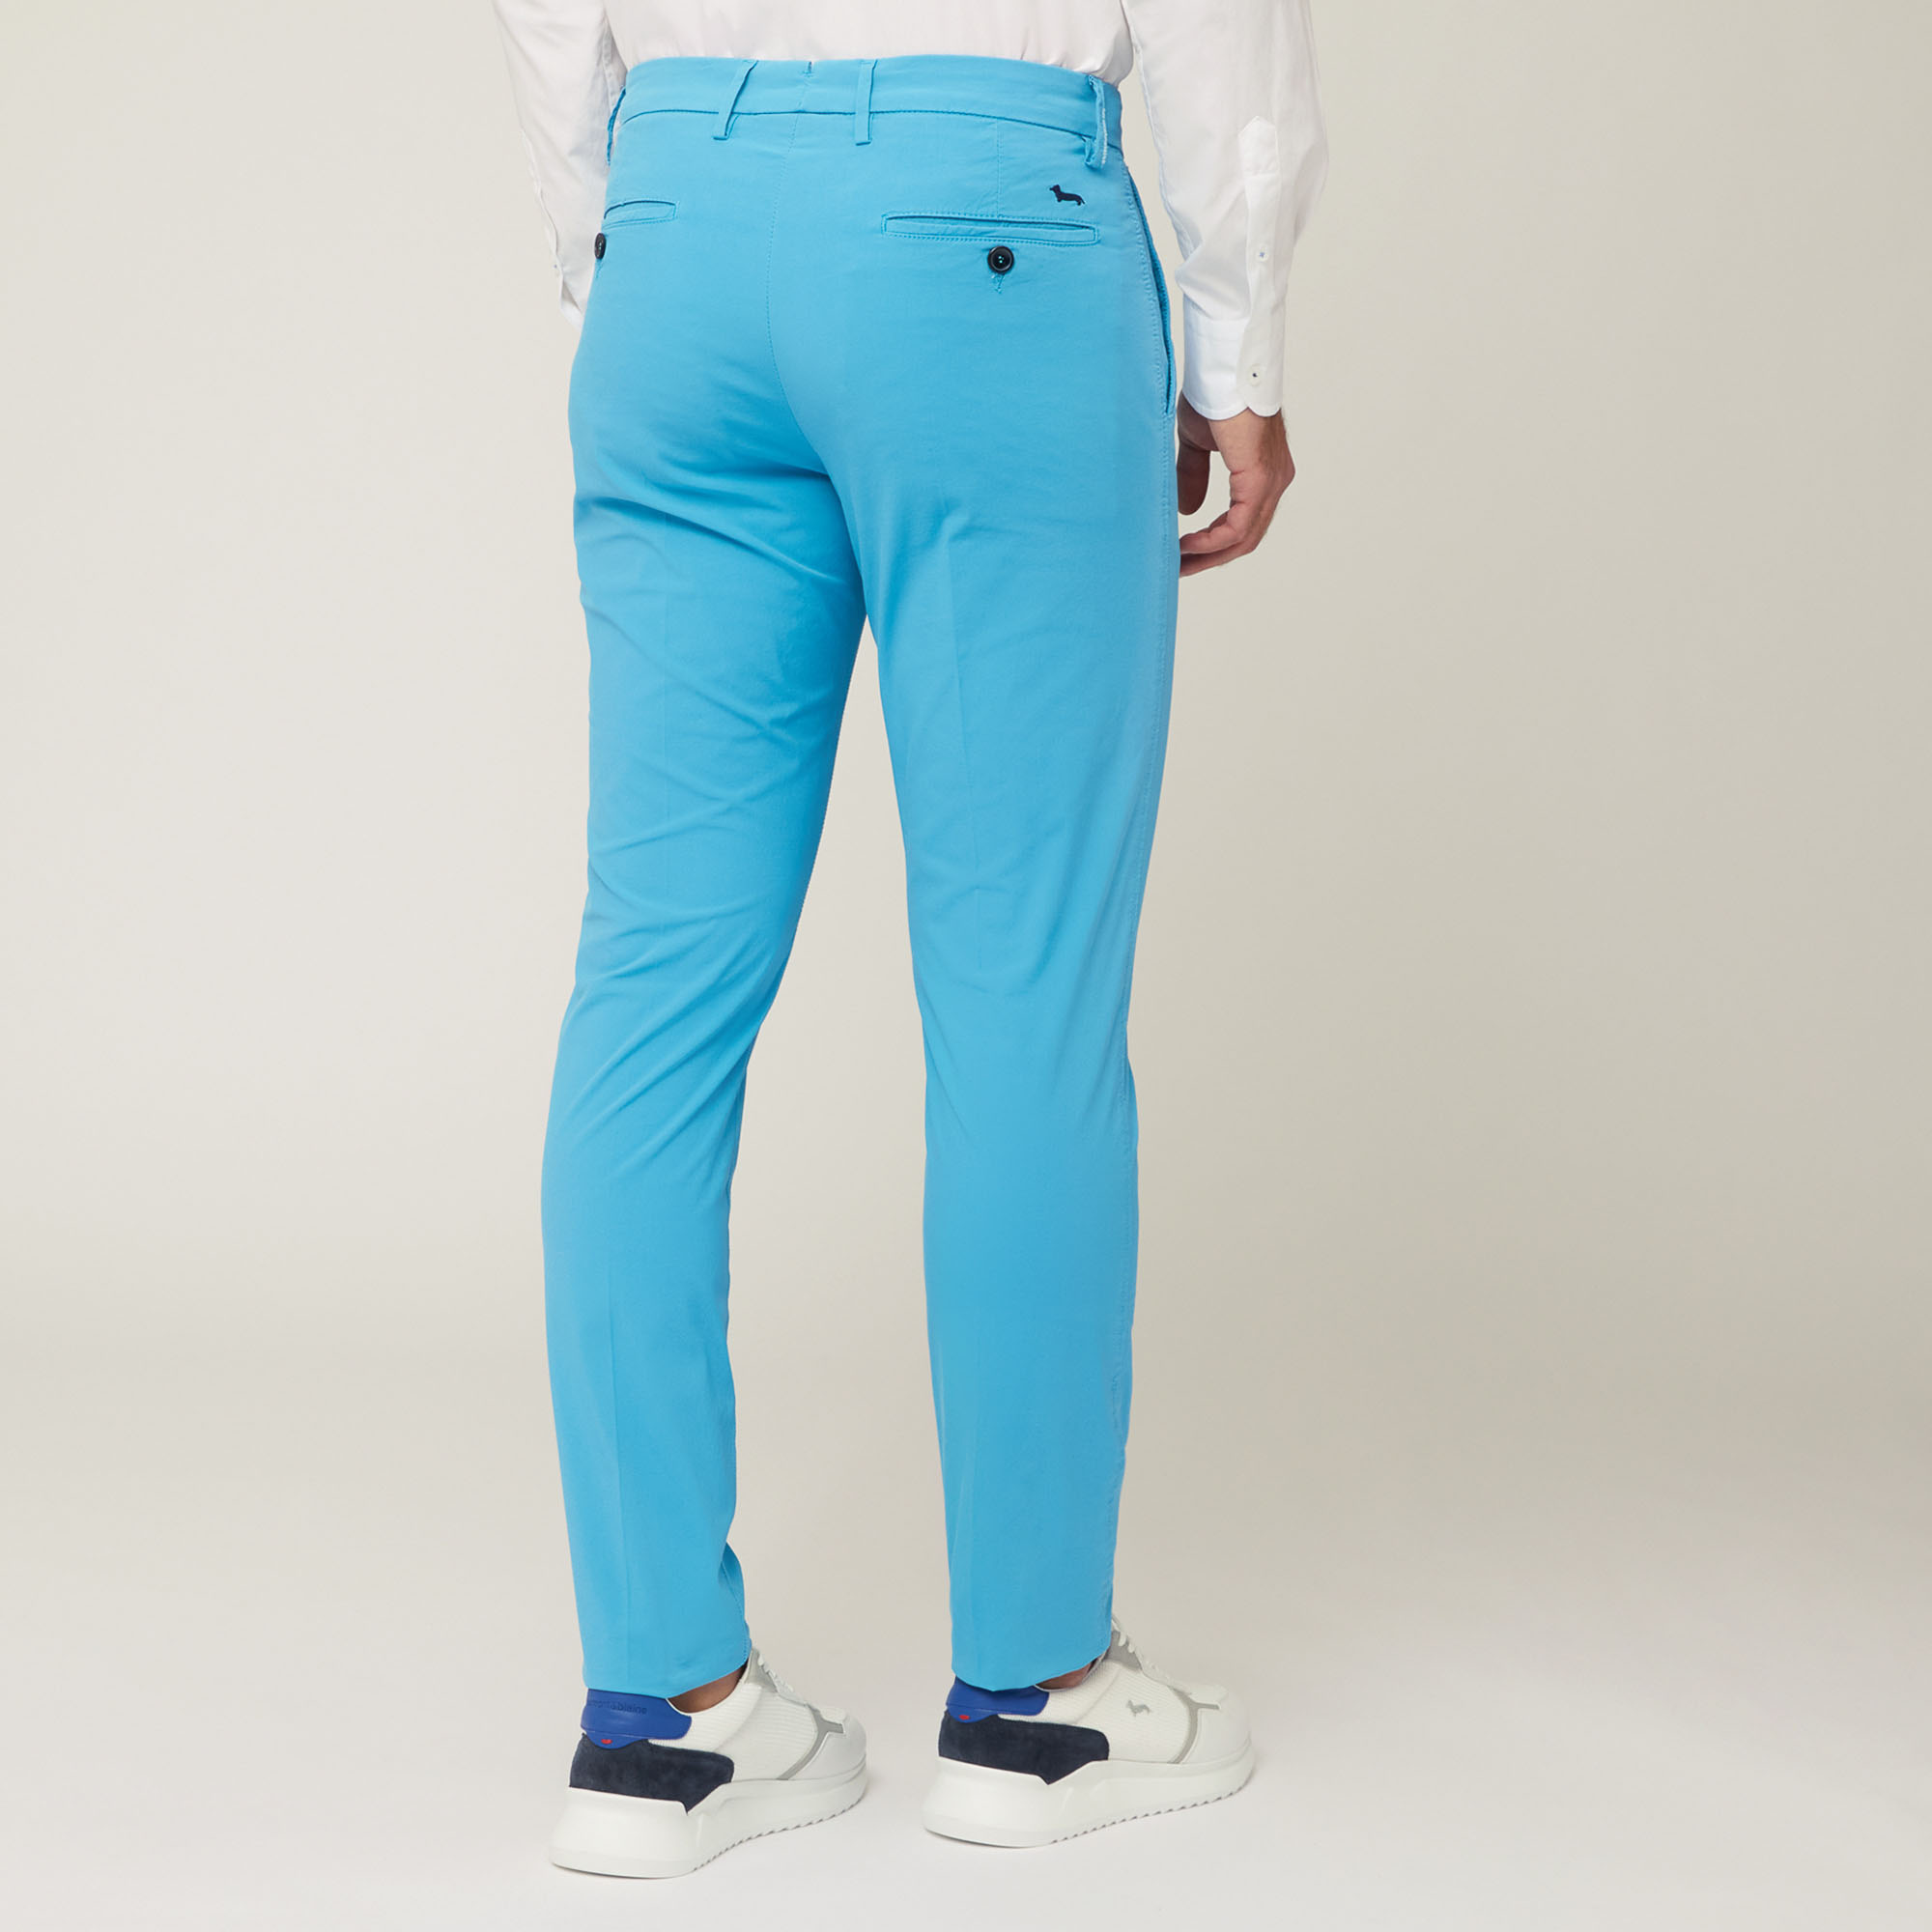 Narrow Fit Chino Pants, Light Blue, large image number 1